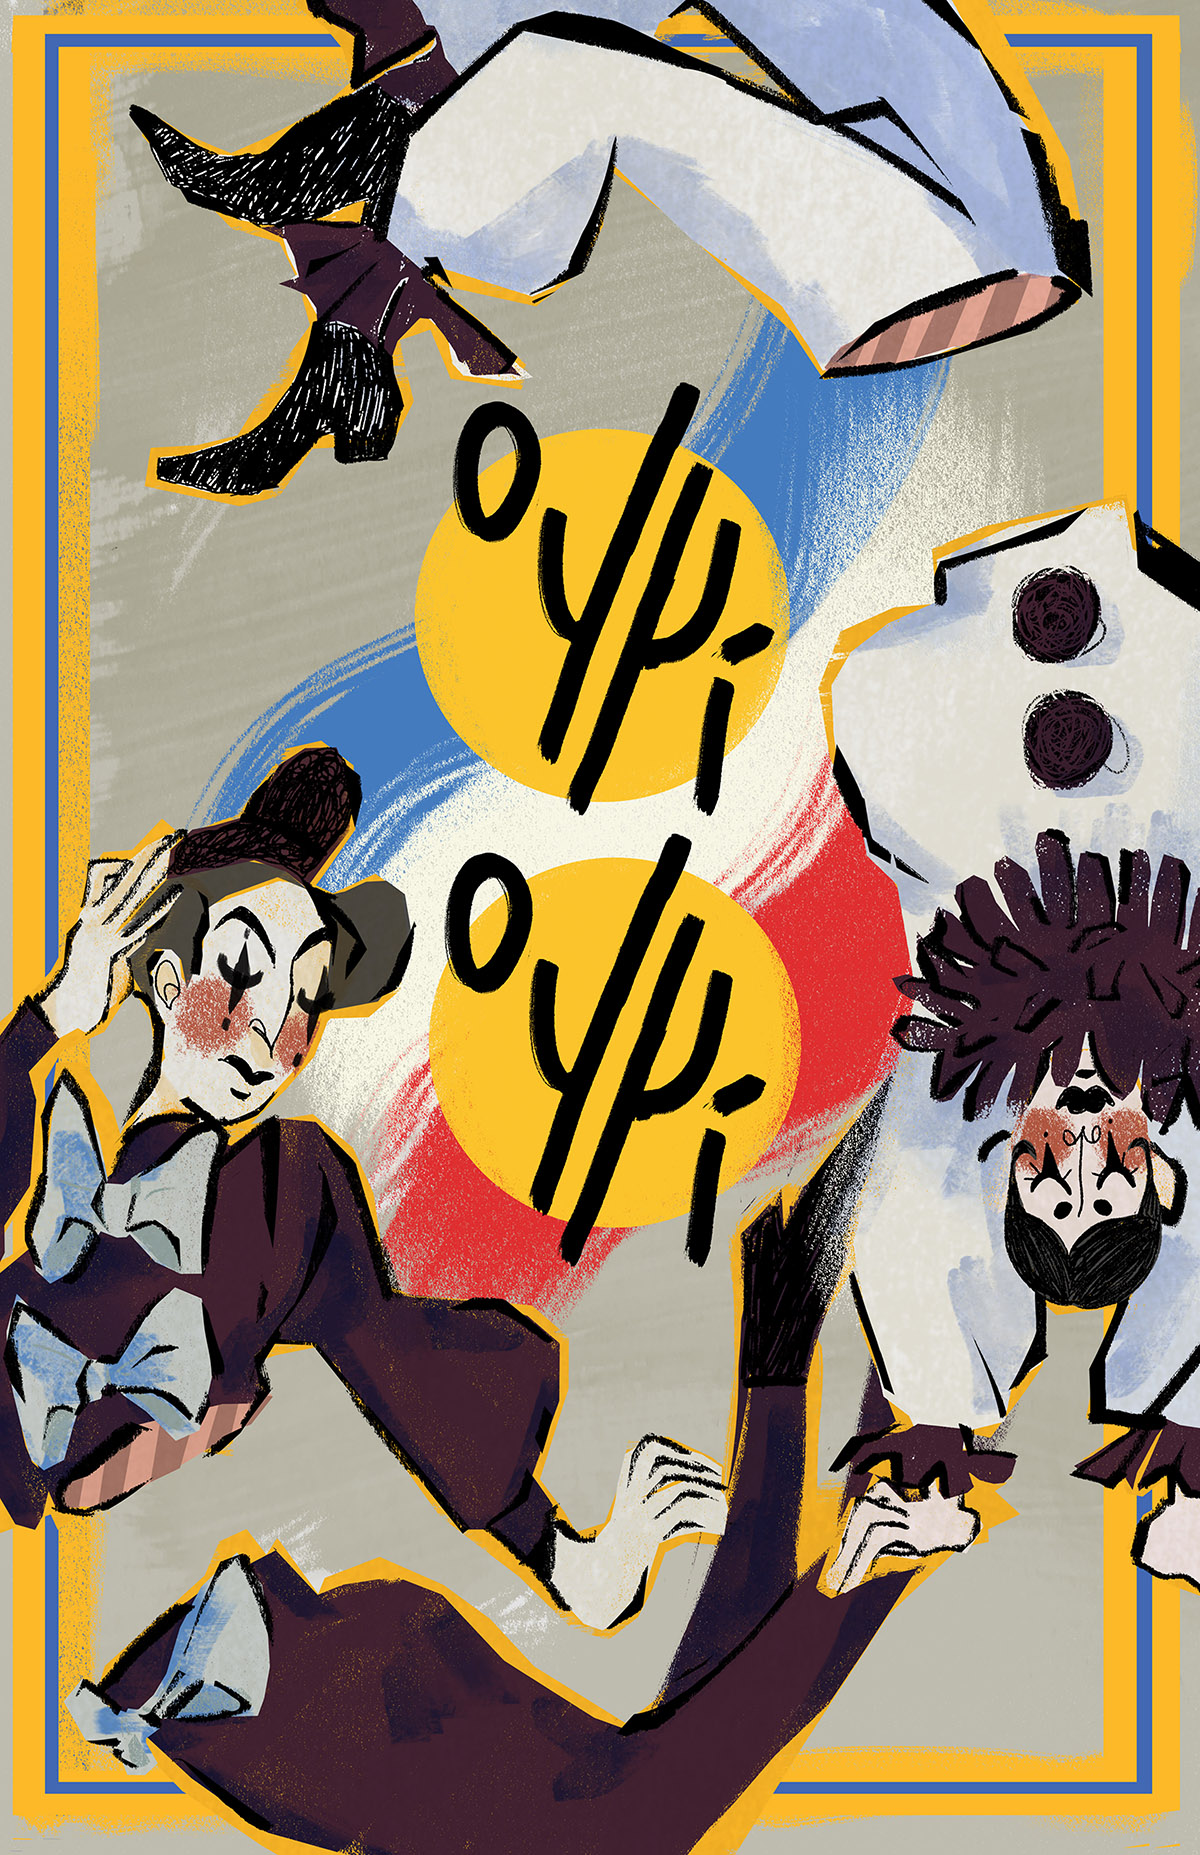 Bold highly textured illustration of two mime clowns in expressive motion, with text highlighted in yellow circles in the center saying 'oyyi, oyyi', second y is backwards.